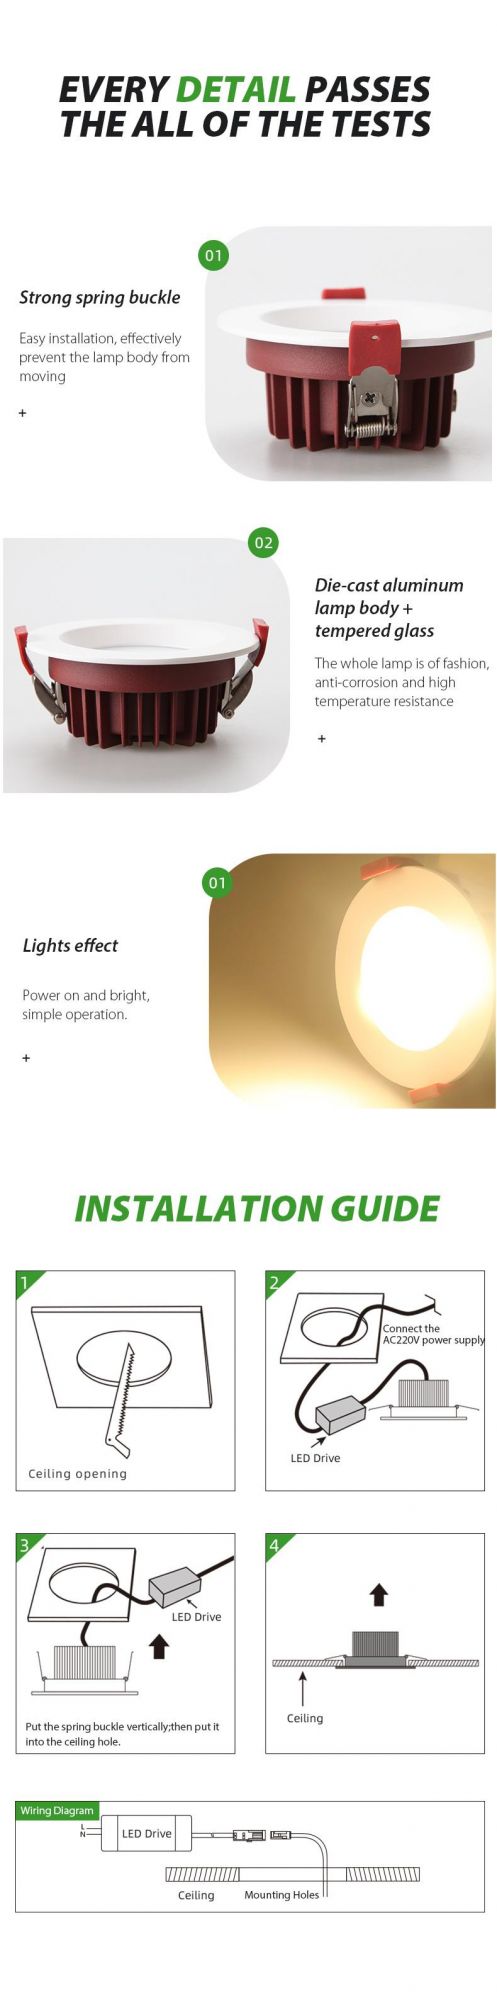 High Quality Indoor Energy Saving Round Ceiling 10W Recessed Downlight LED (WF-LDL-MR-10W)